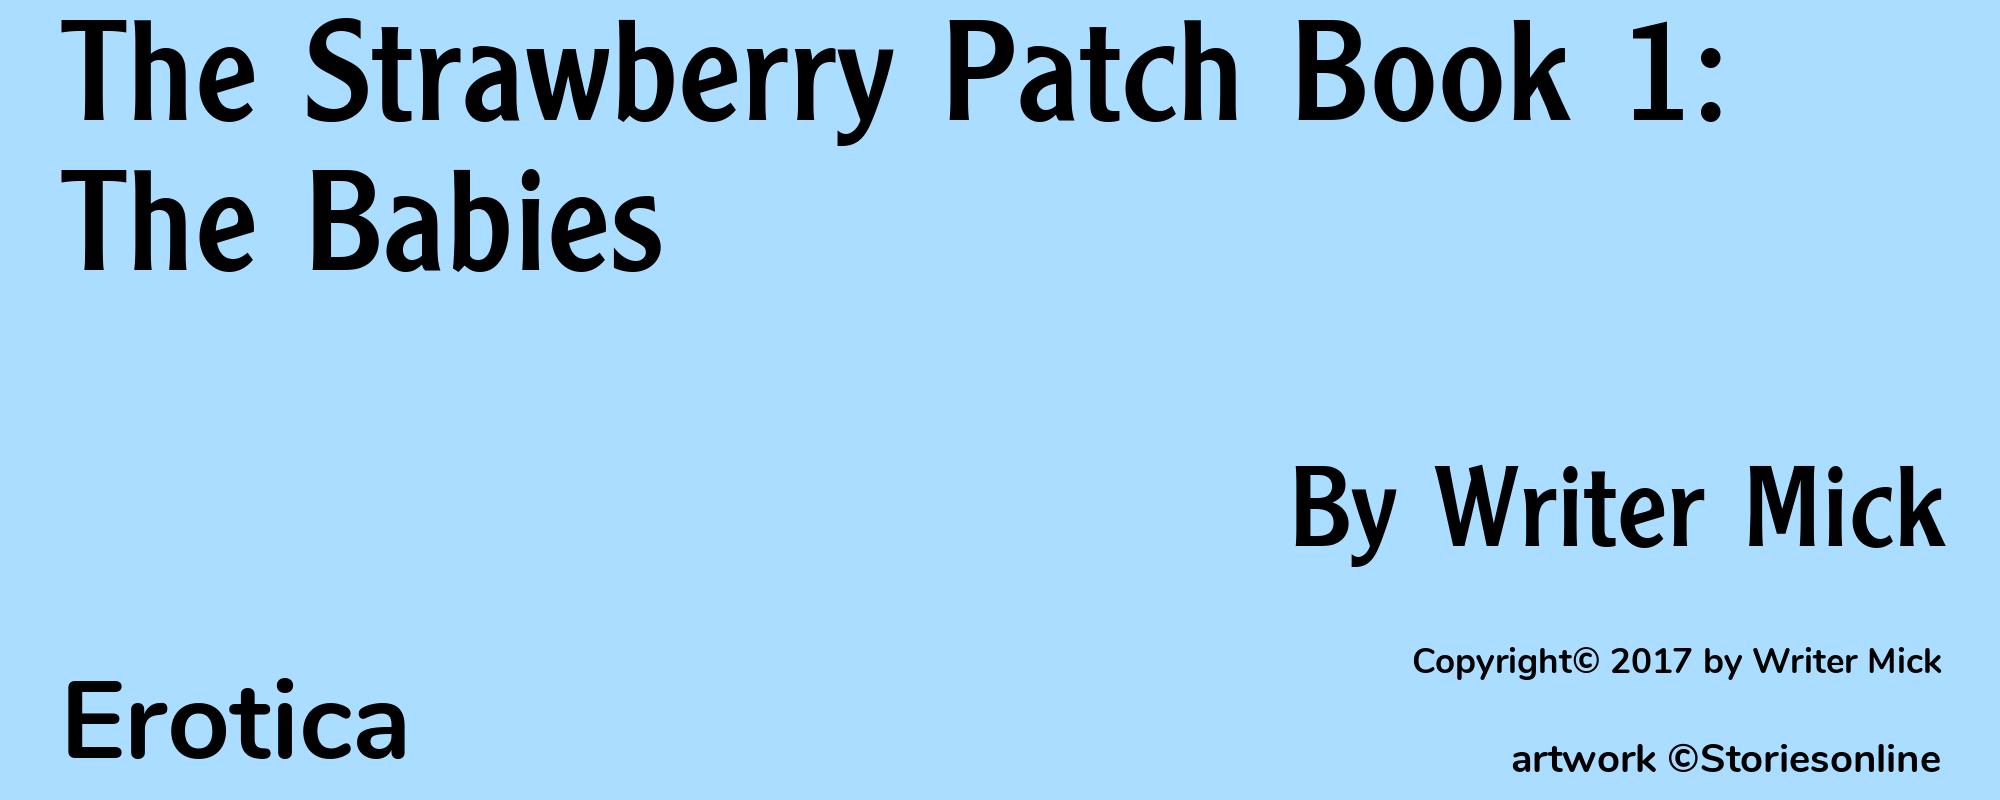 The Strawberry Patch Book 1: The Babies - Cover